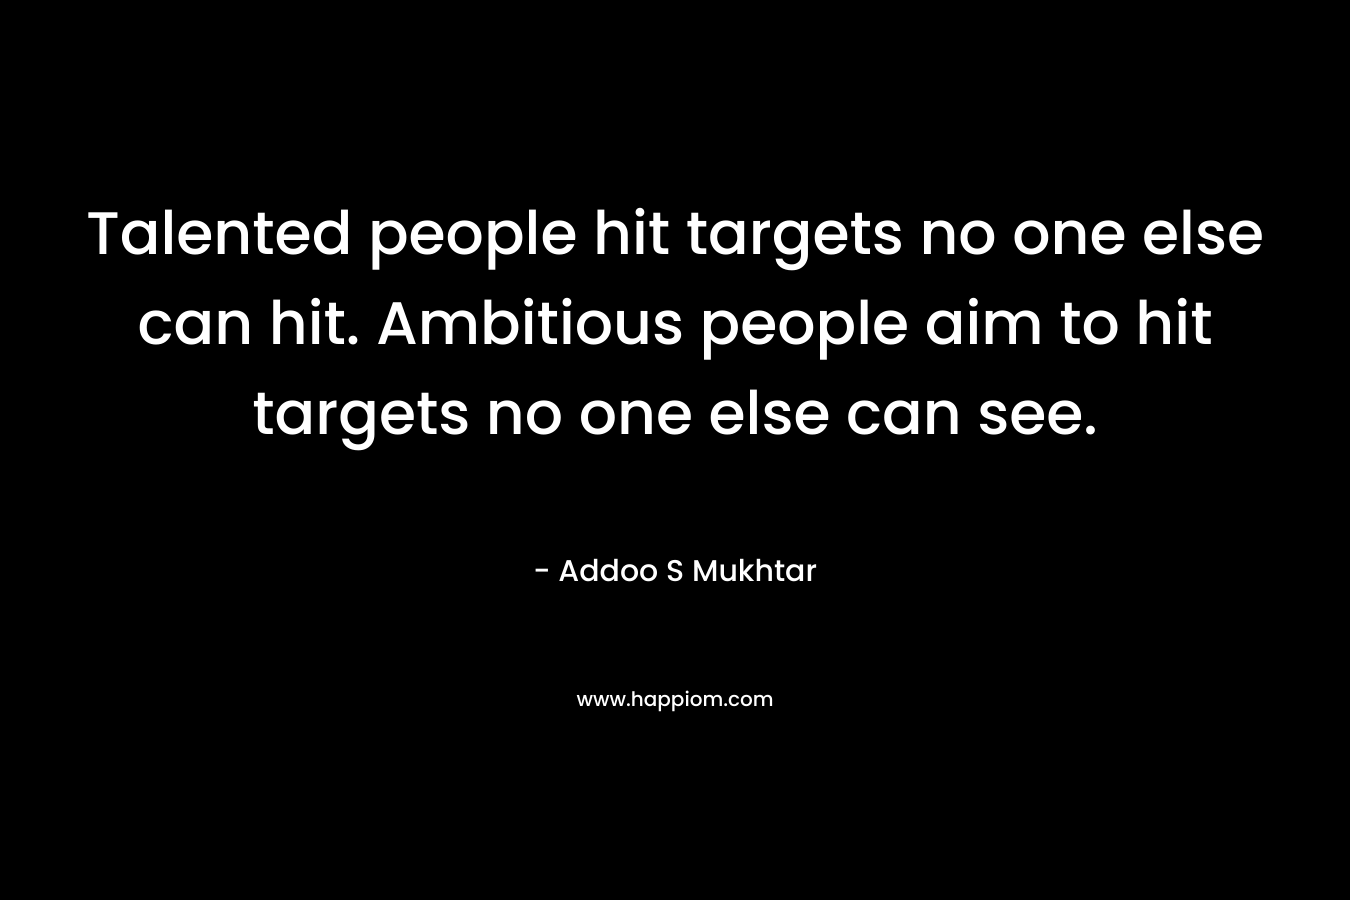 Talented people hit targets no one else can hit. Ambitious people aim to hit targets no one else can see.